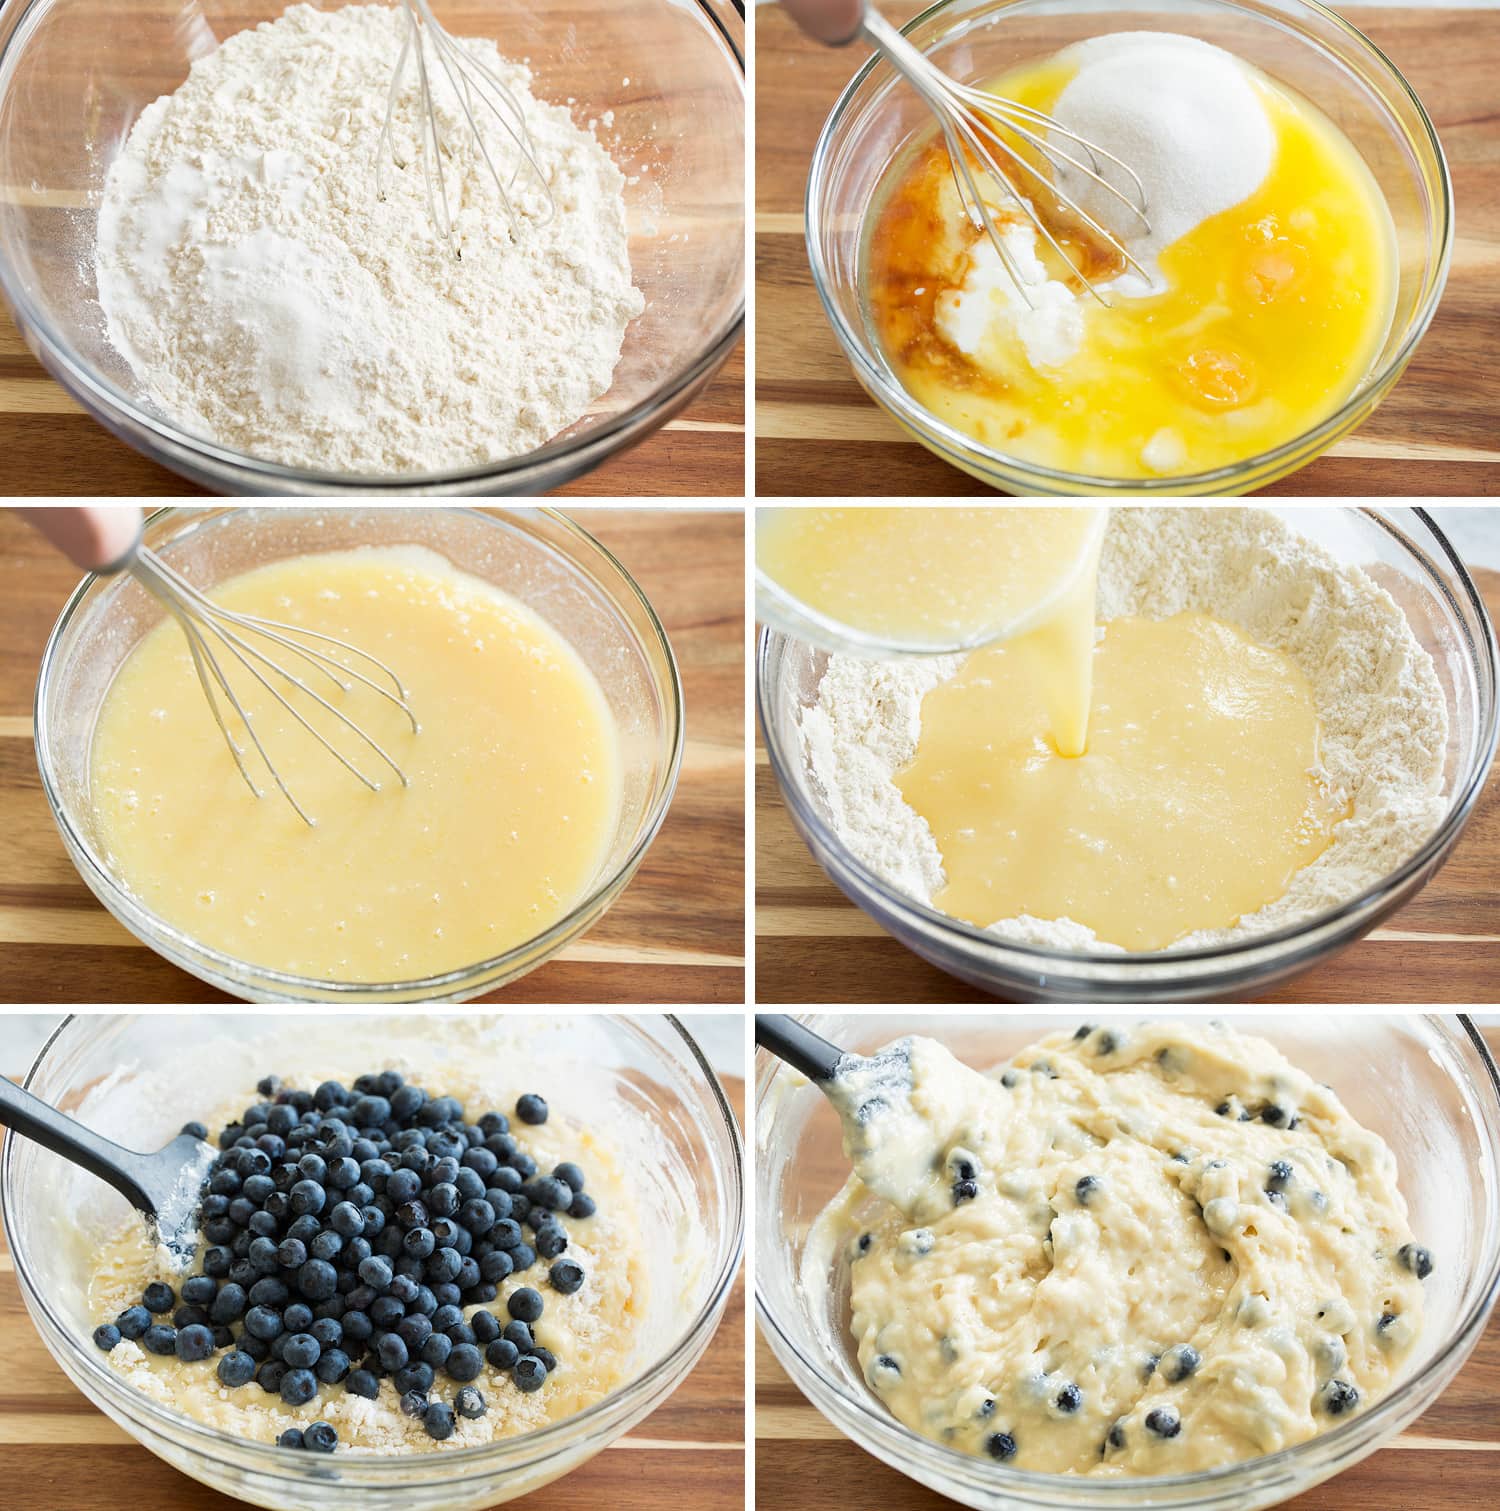 Steps of making blueberry muffin batter.